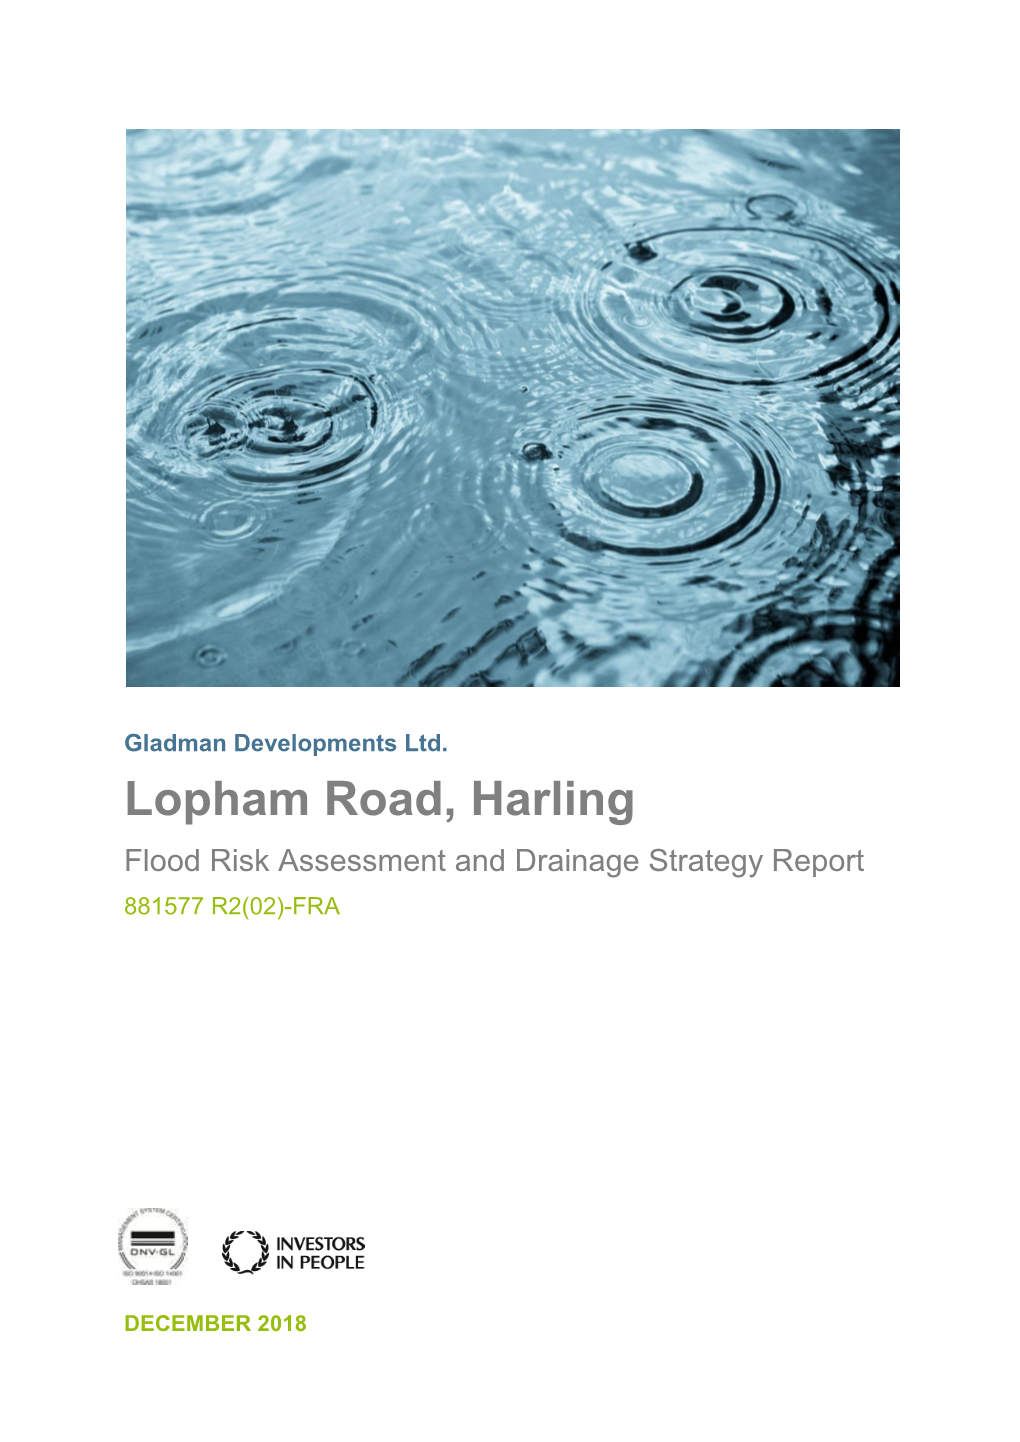 Flood Risk Assessment and Drainage Strategy Report 881577 R2(02)-FRA